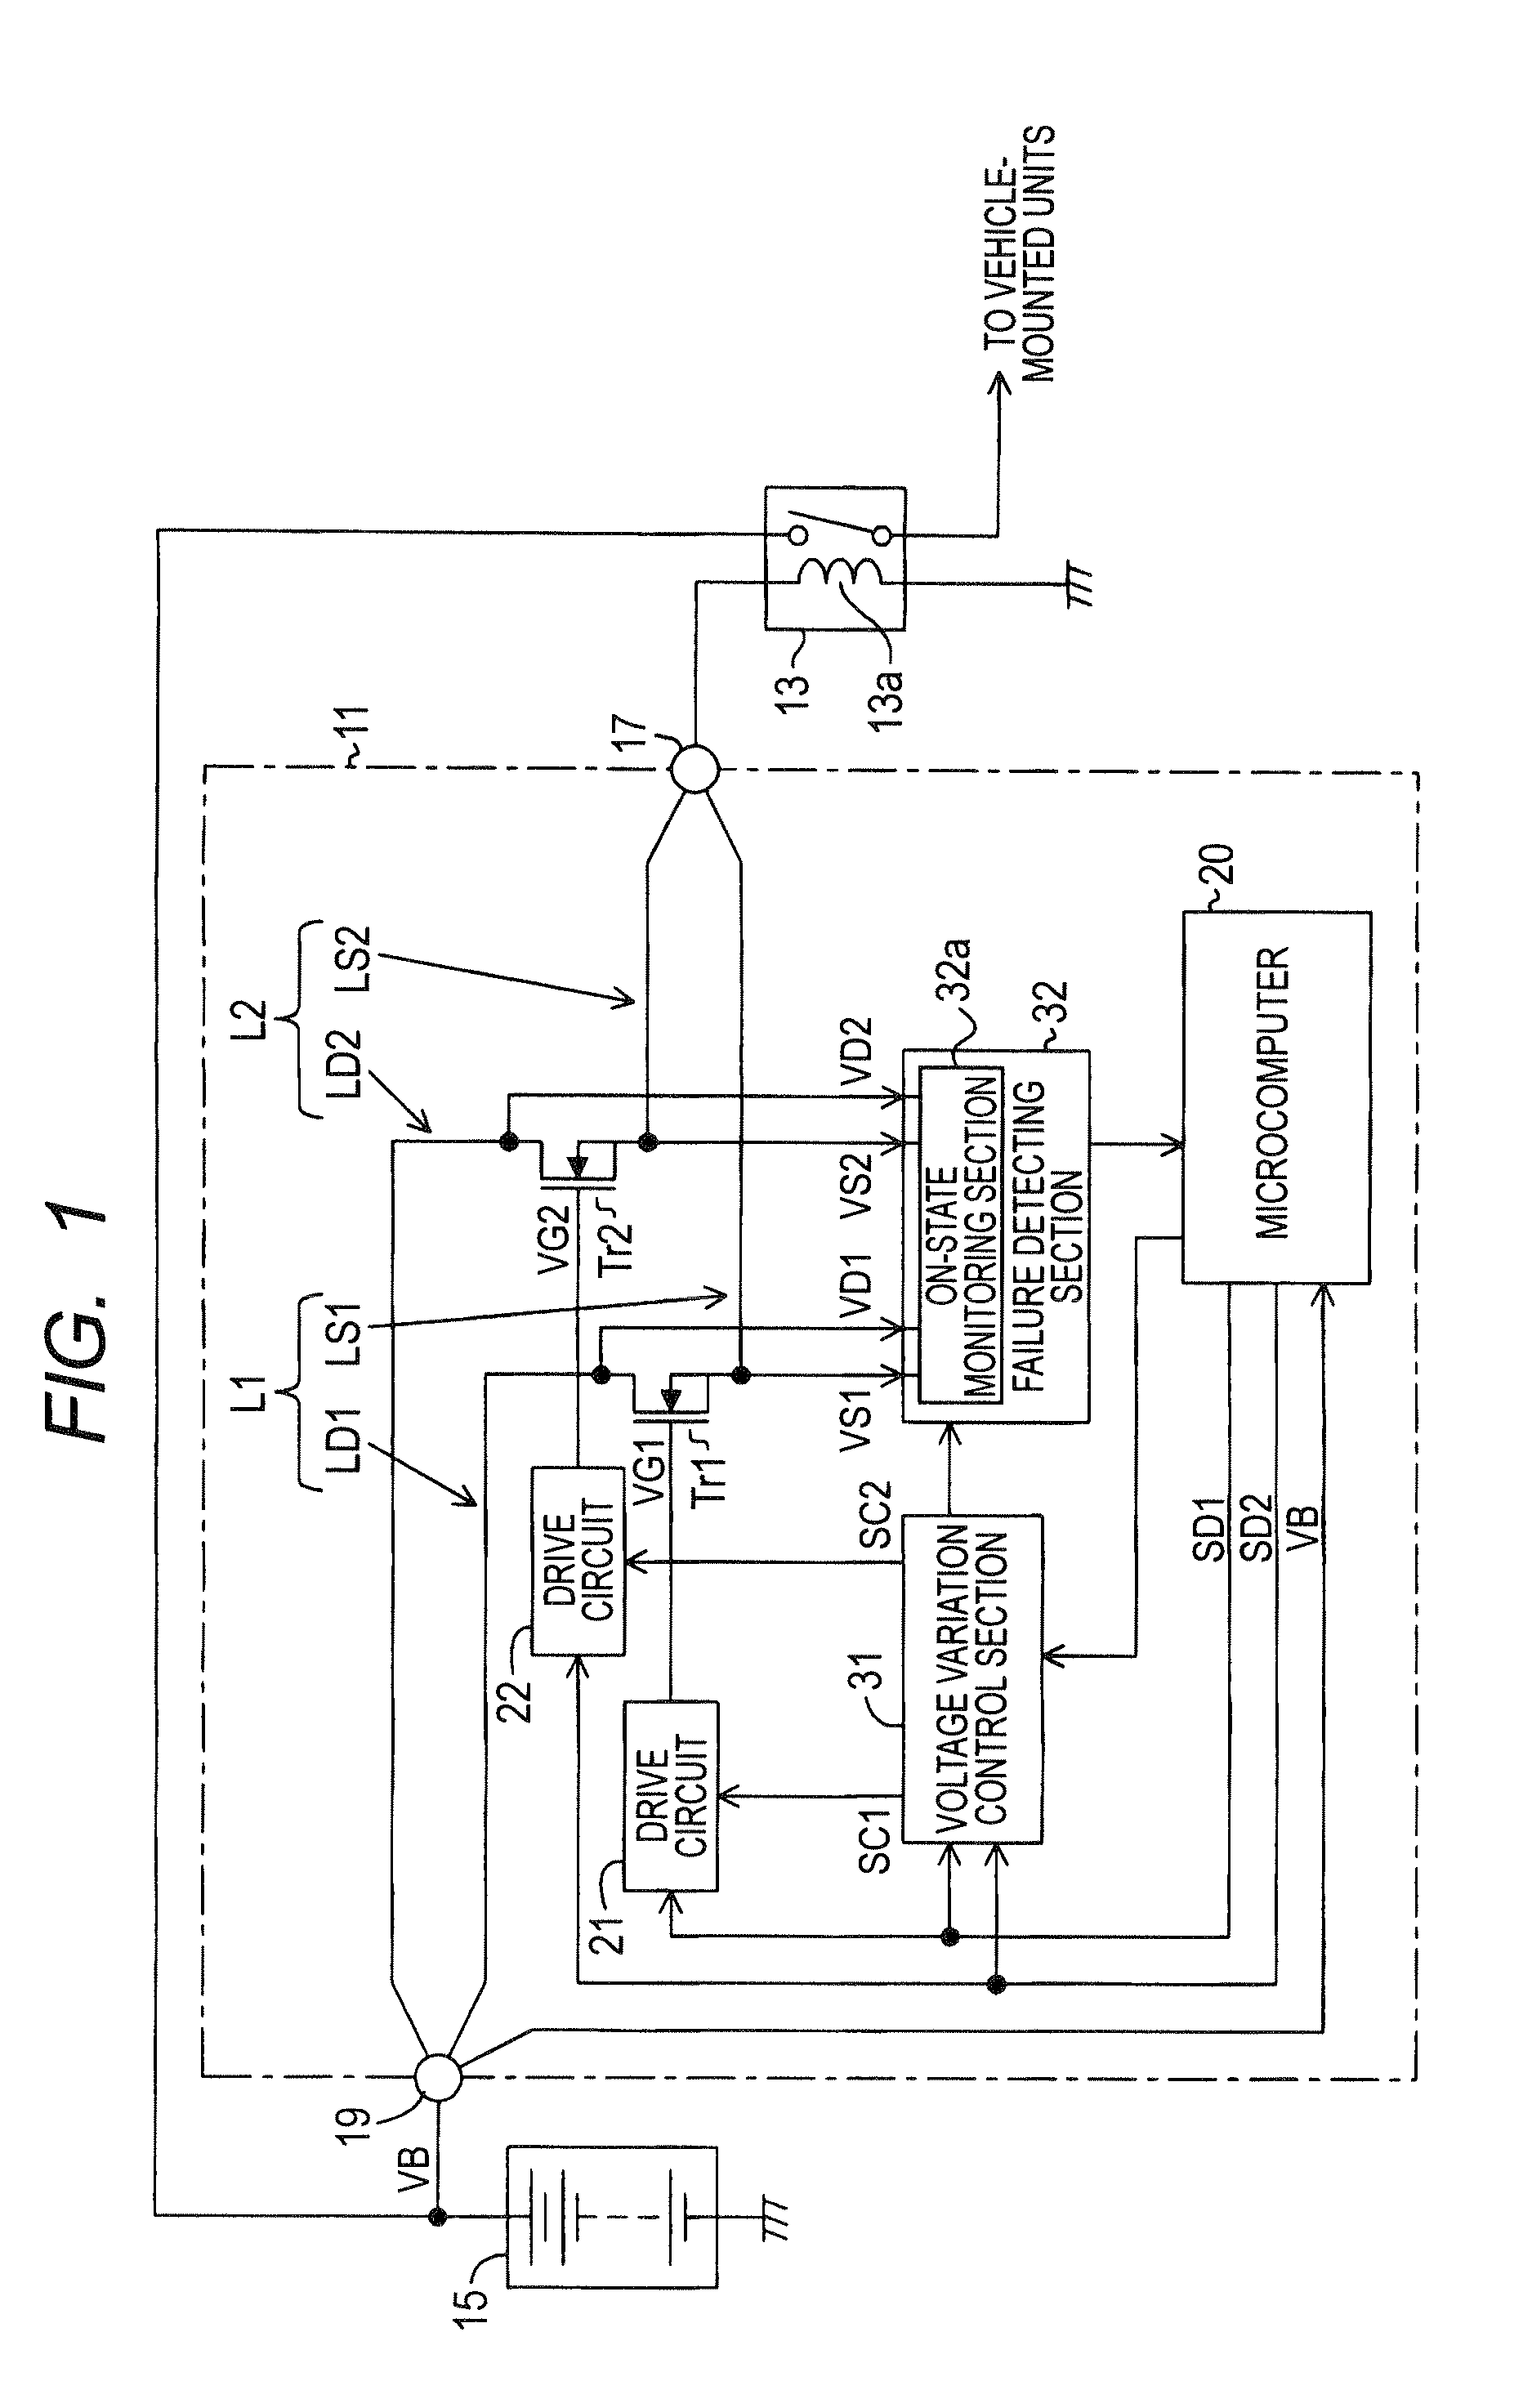 Electrical load driving apparatus